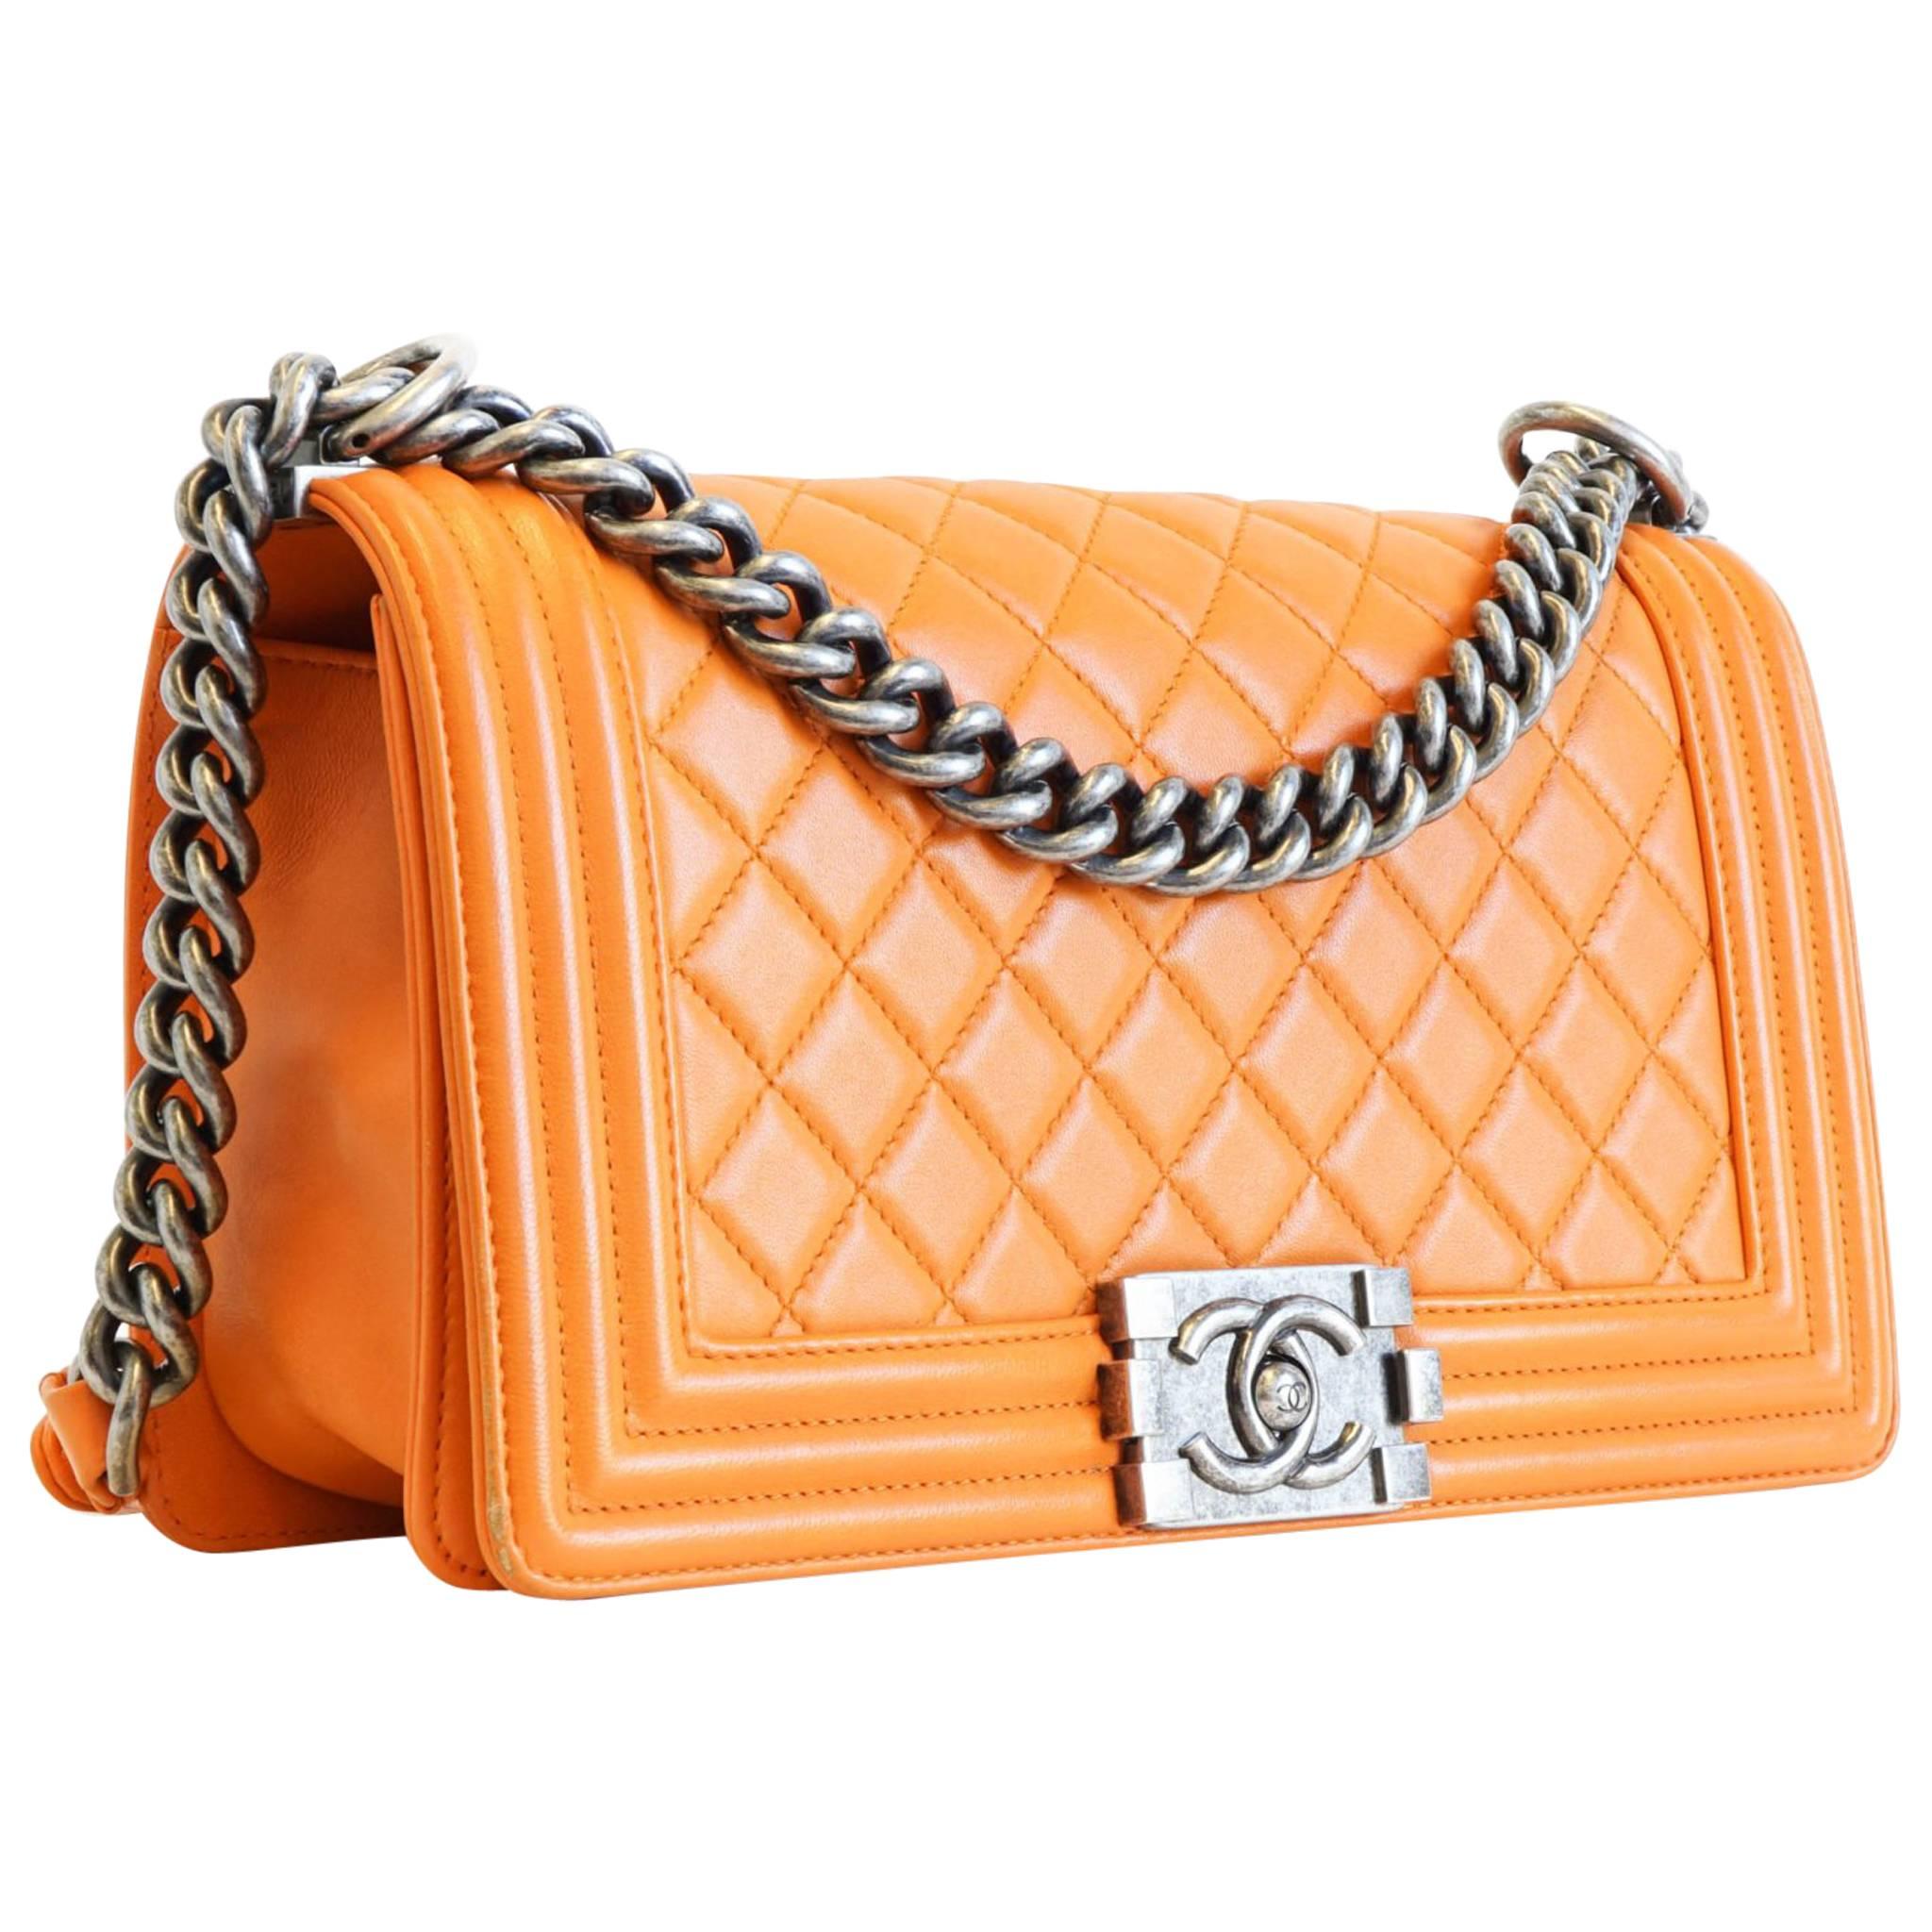 Chanel Old Medium Boy Bag in Orange with Silver Hardware For Sale